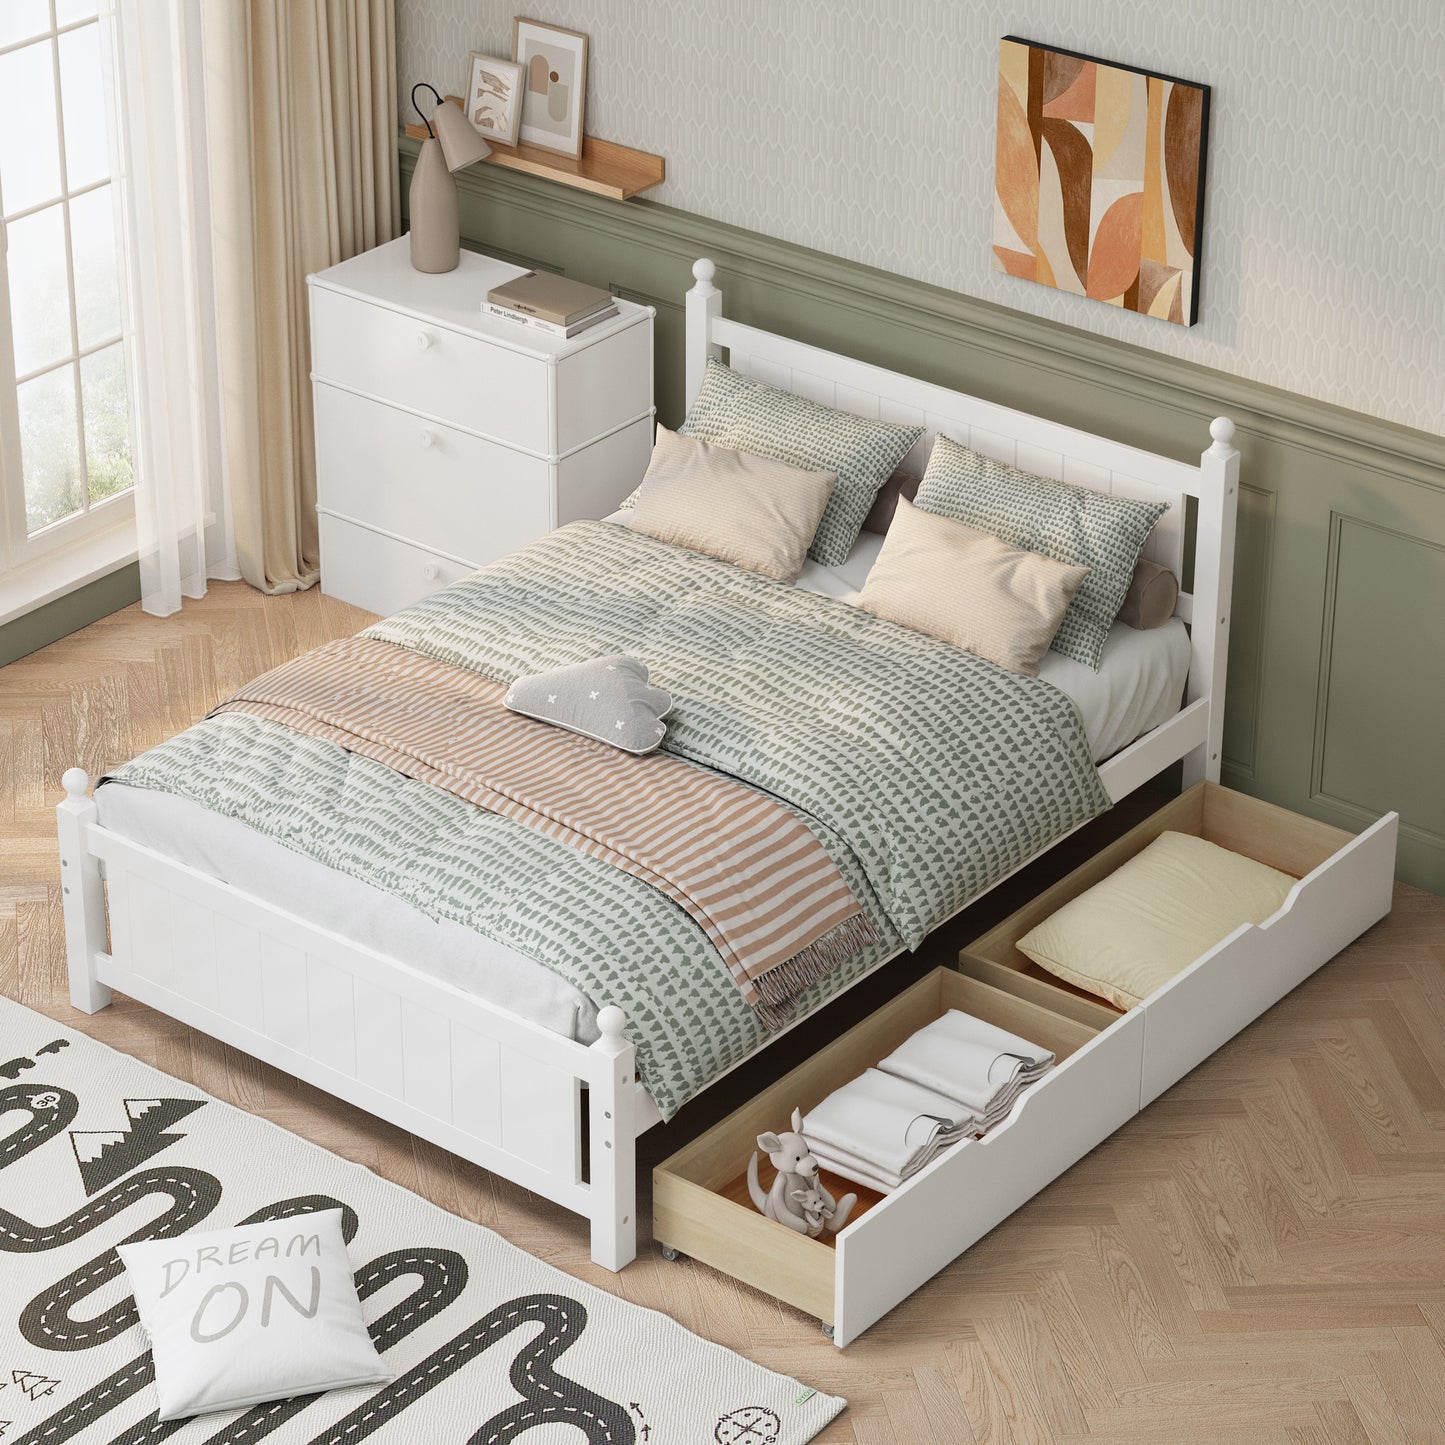 Full Size Solid Wood Platform Bed Frame with 2 drawers for Limited Space Kids, Teens, Adults, No Need Box Spring, White